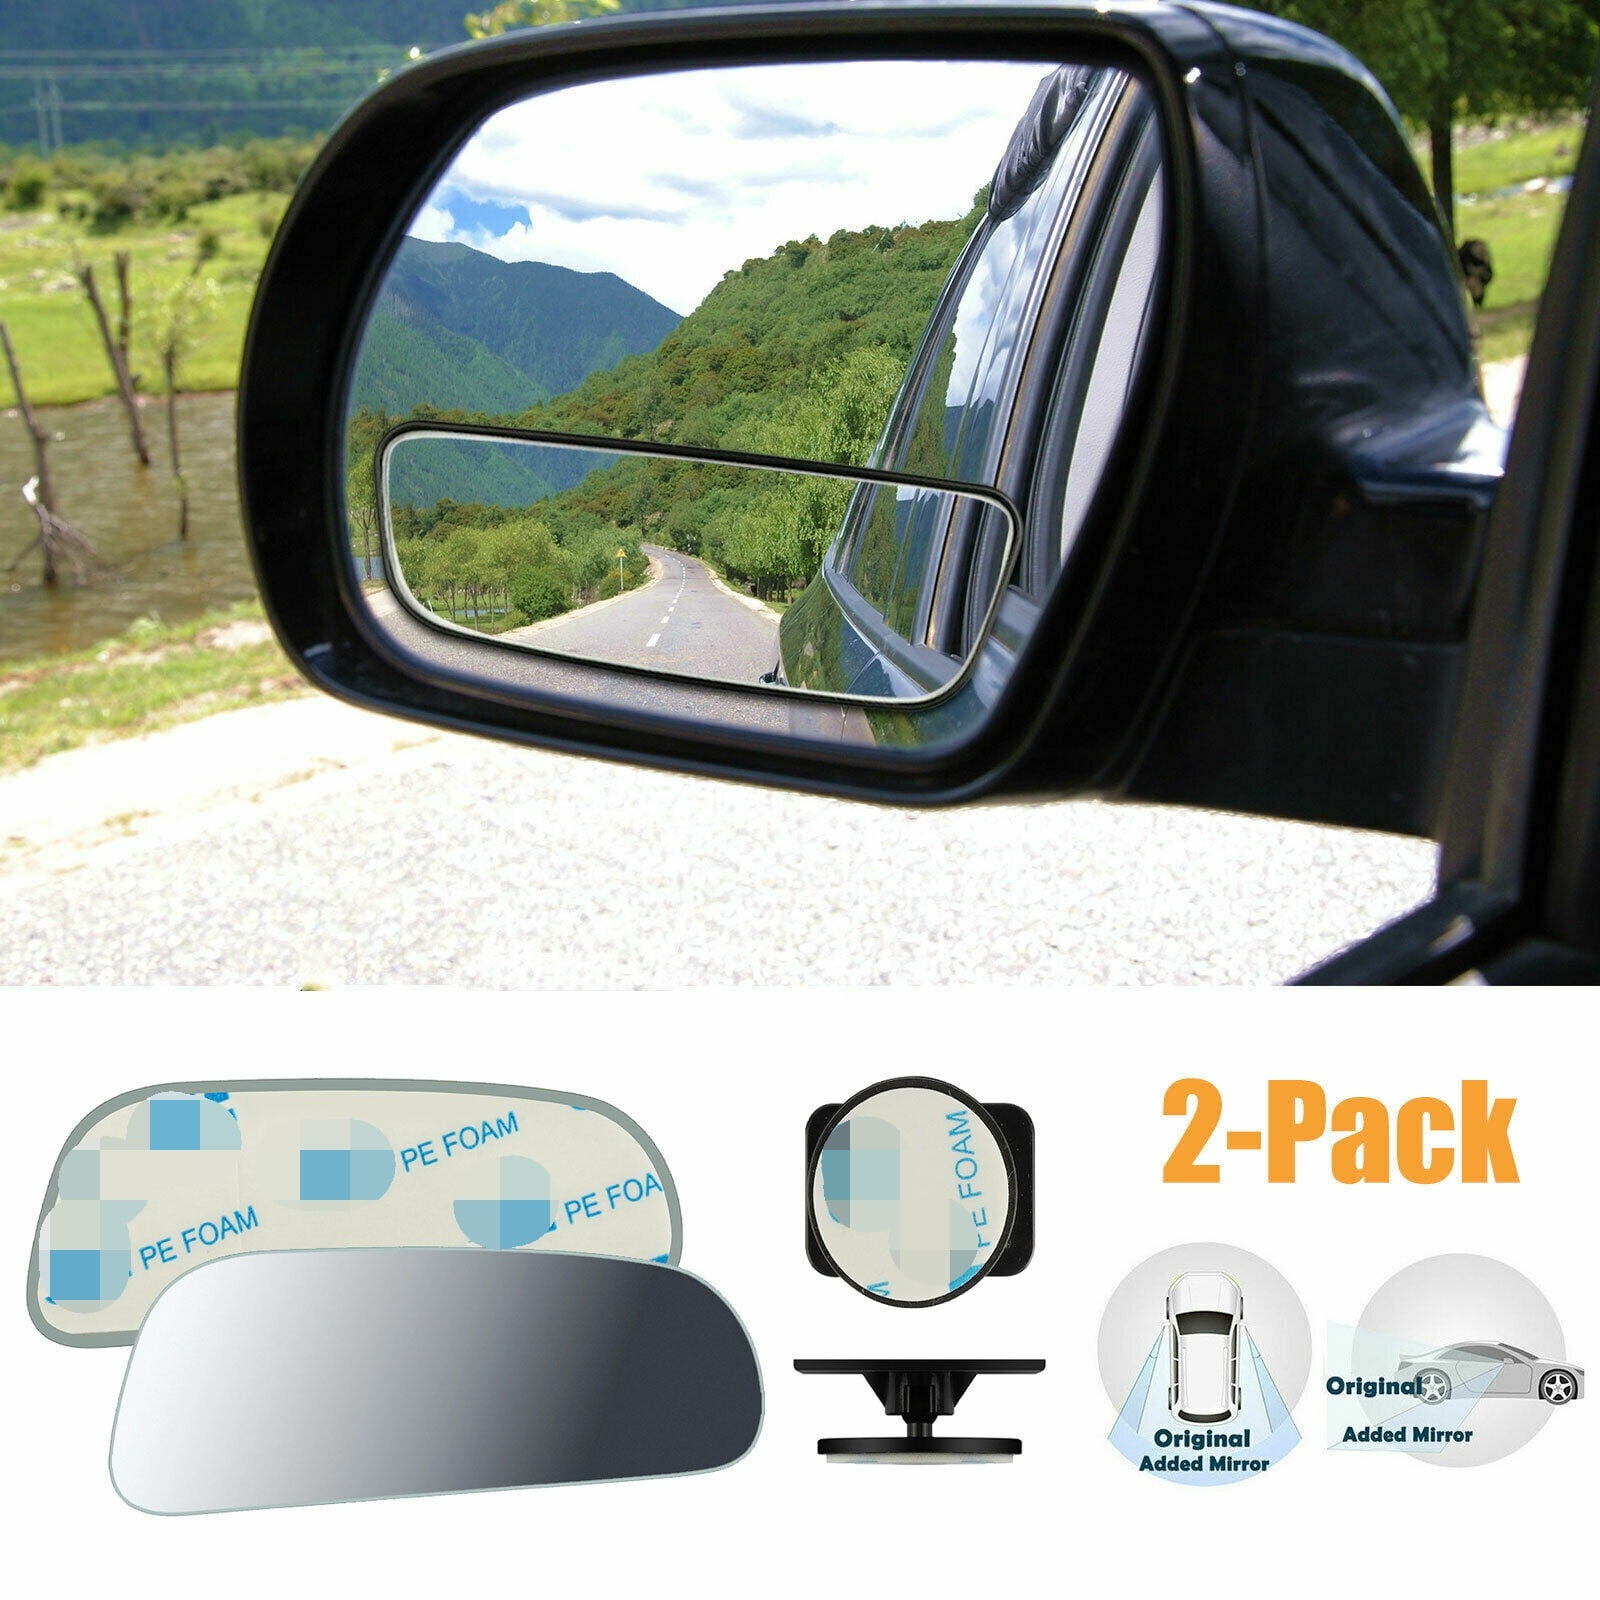 Car Door Mirrors New Blind Spot Can Be Installed Adjustable Or Fixed 2 Pack 